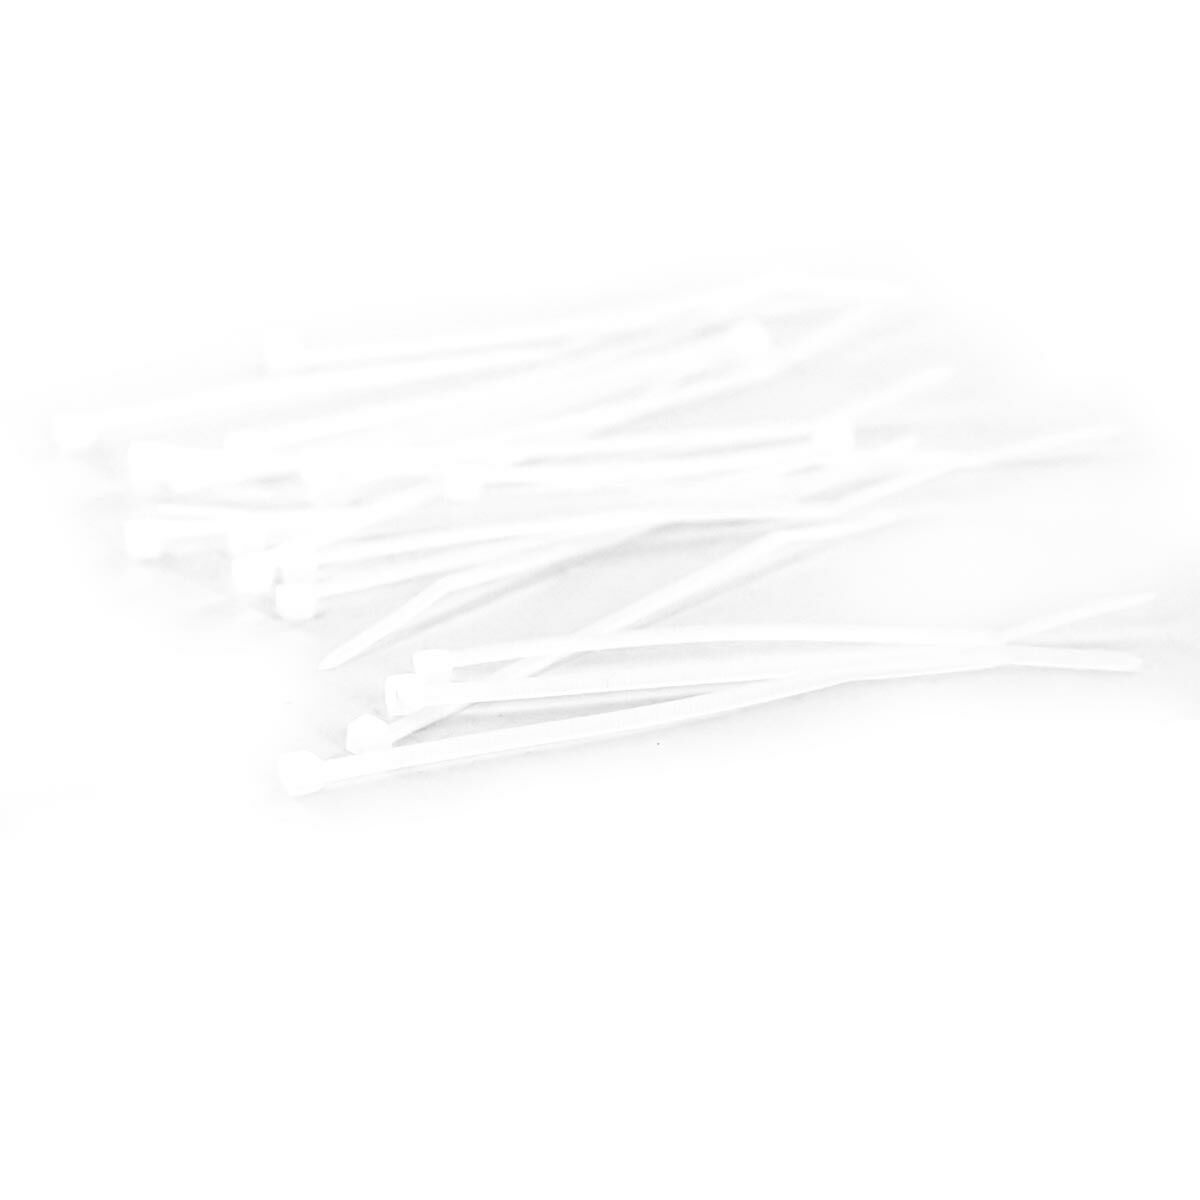 100mm x 2.5mm White Cable Ties, 20pcs image 1